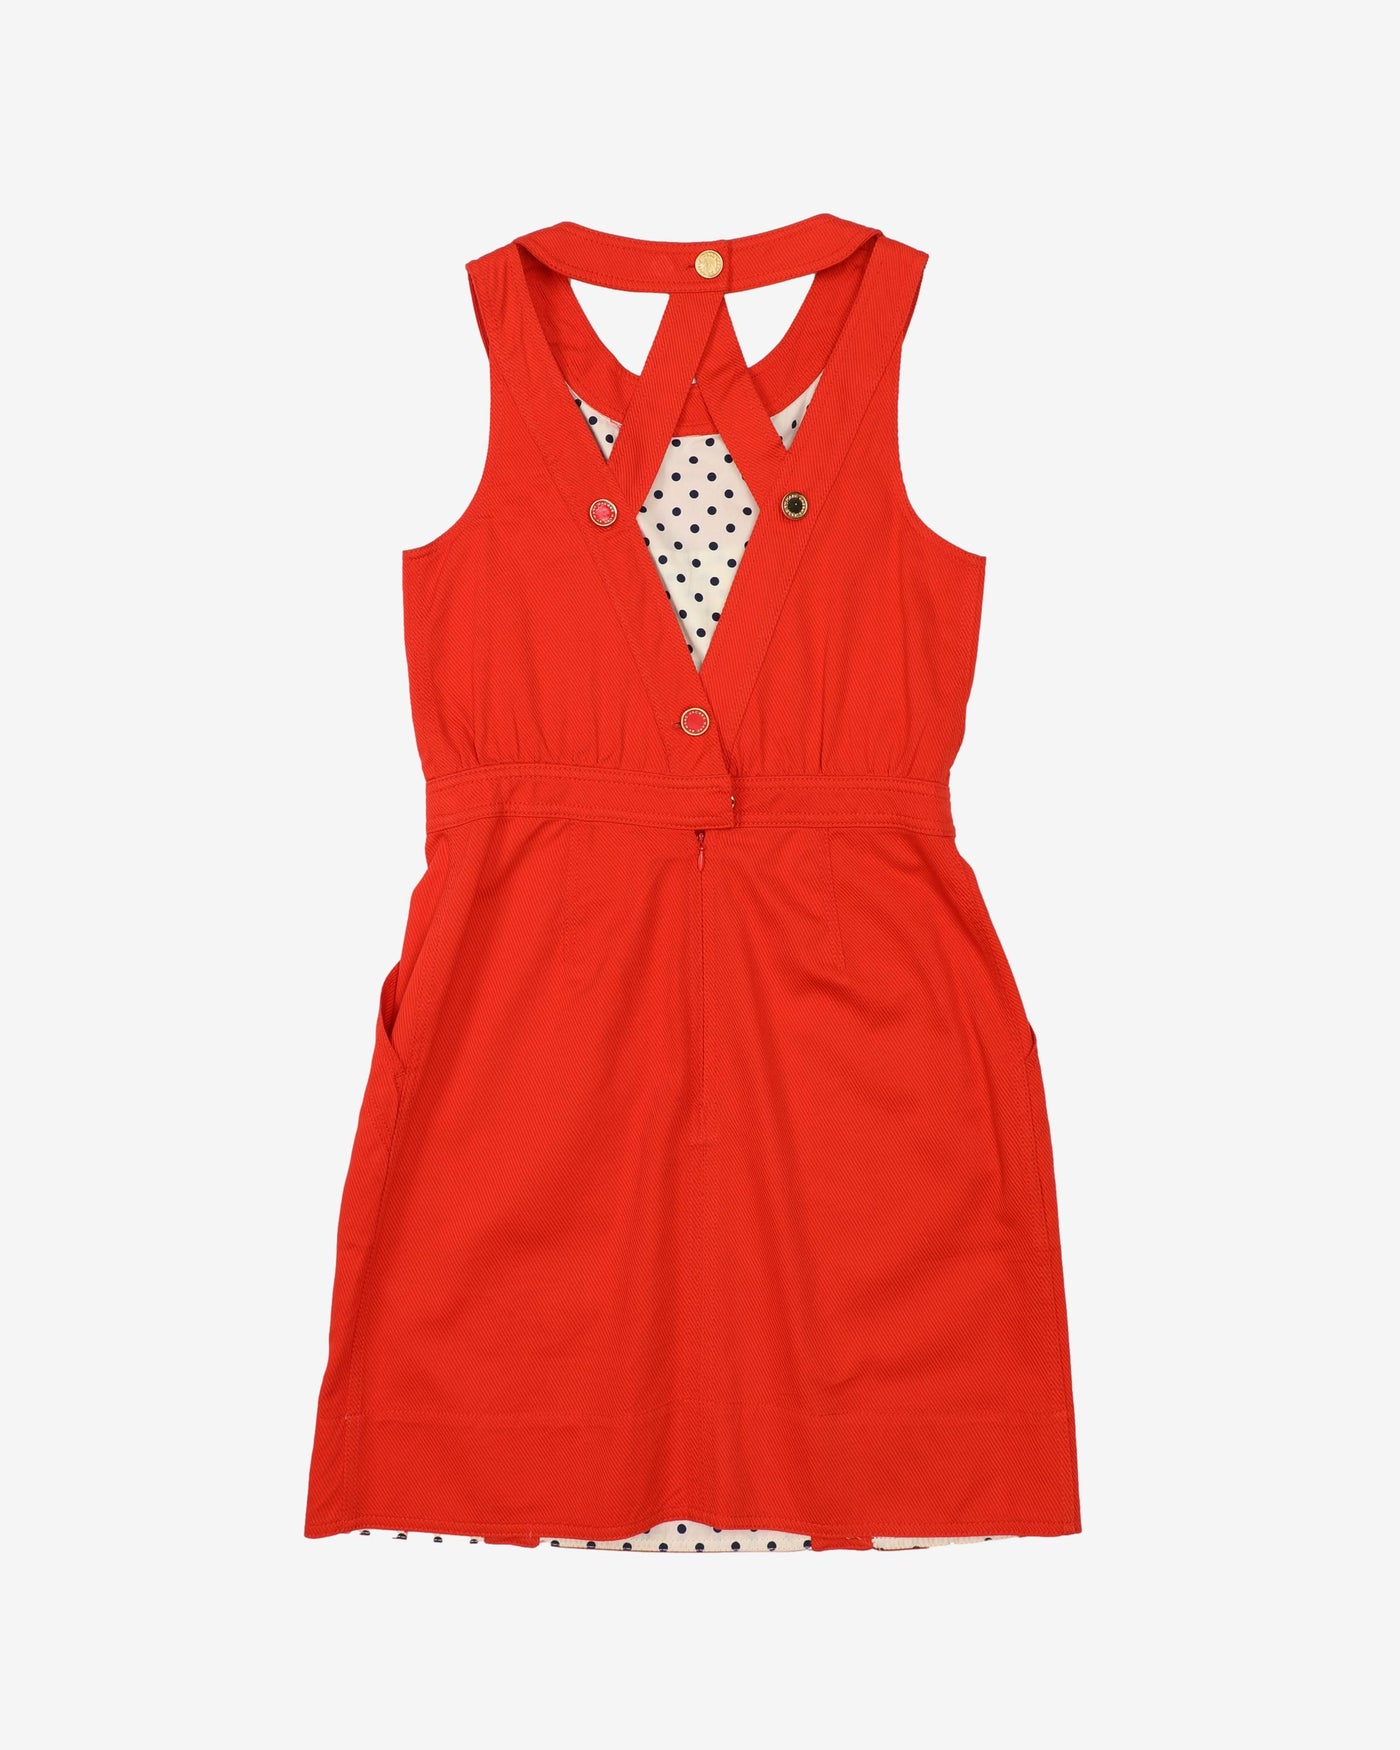 Marc Jacobs Sleeveless With Pockets Dress - S